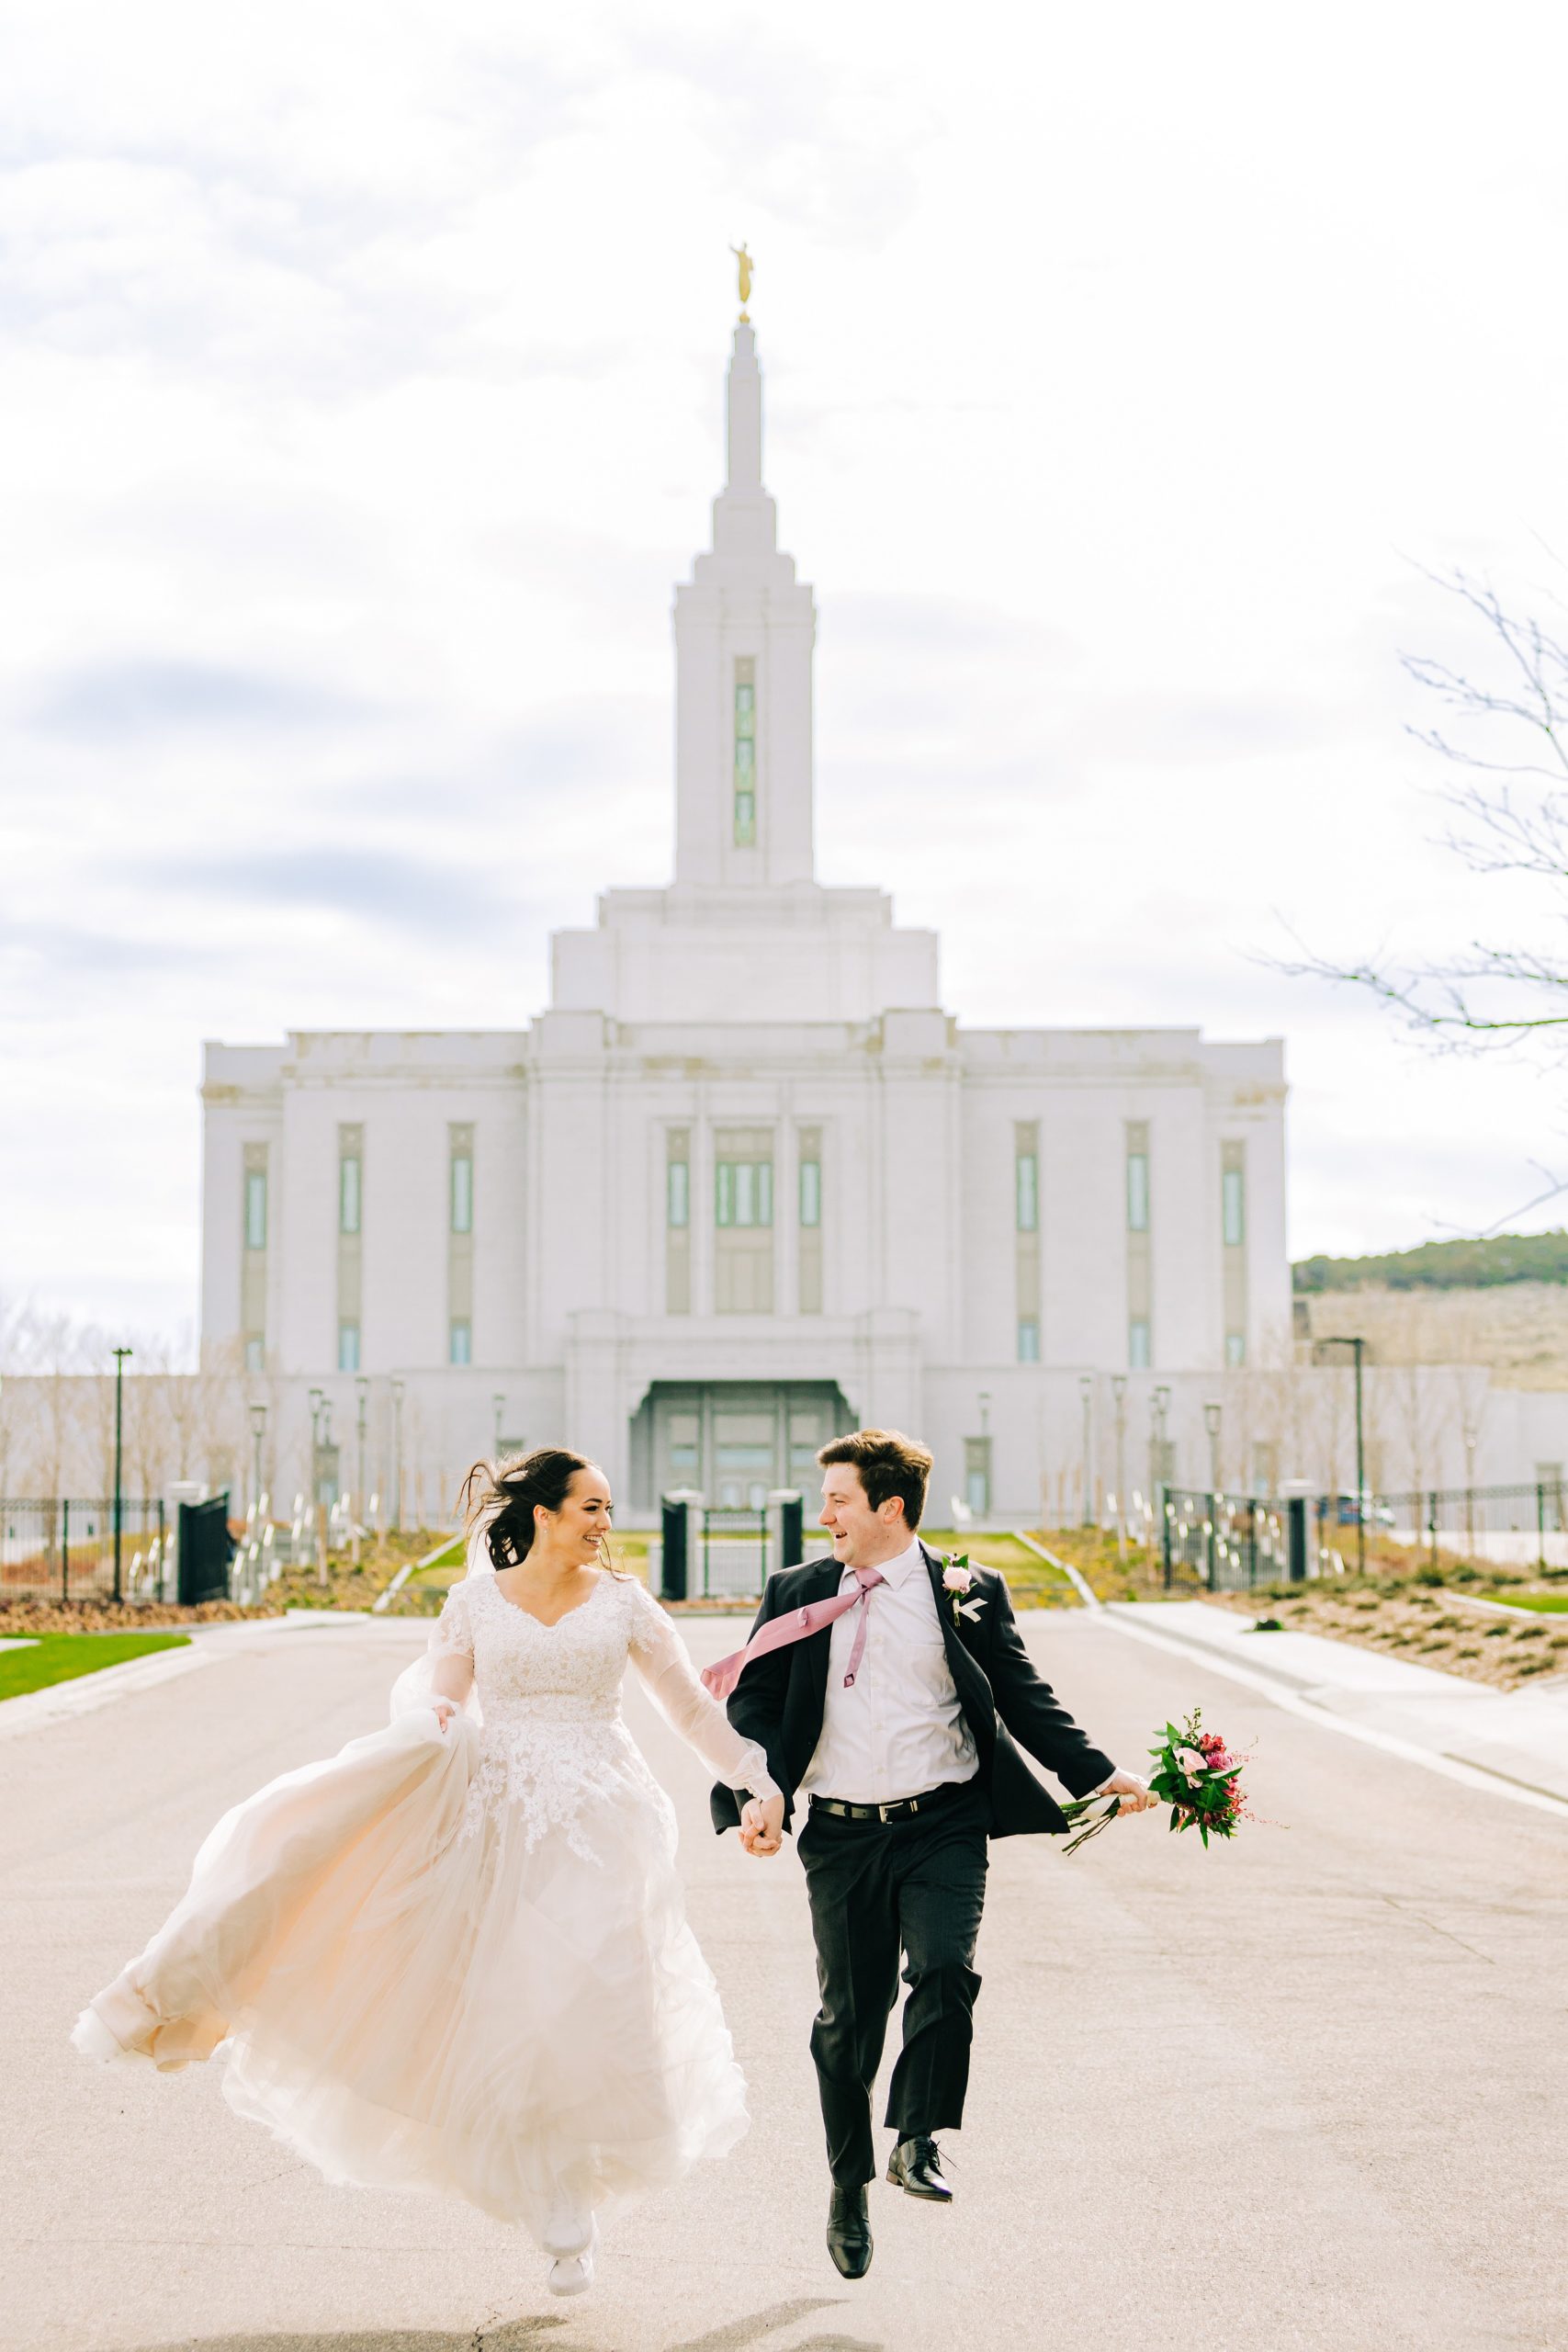 skipping bride and groom on windy day at pocatello temple wedding